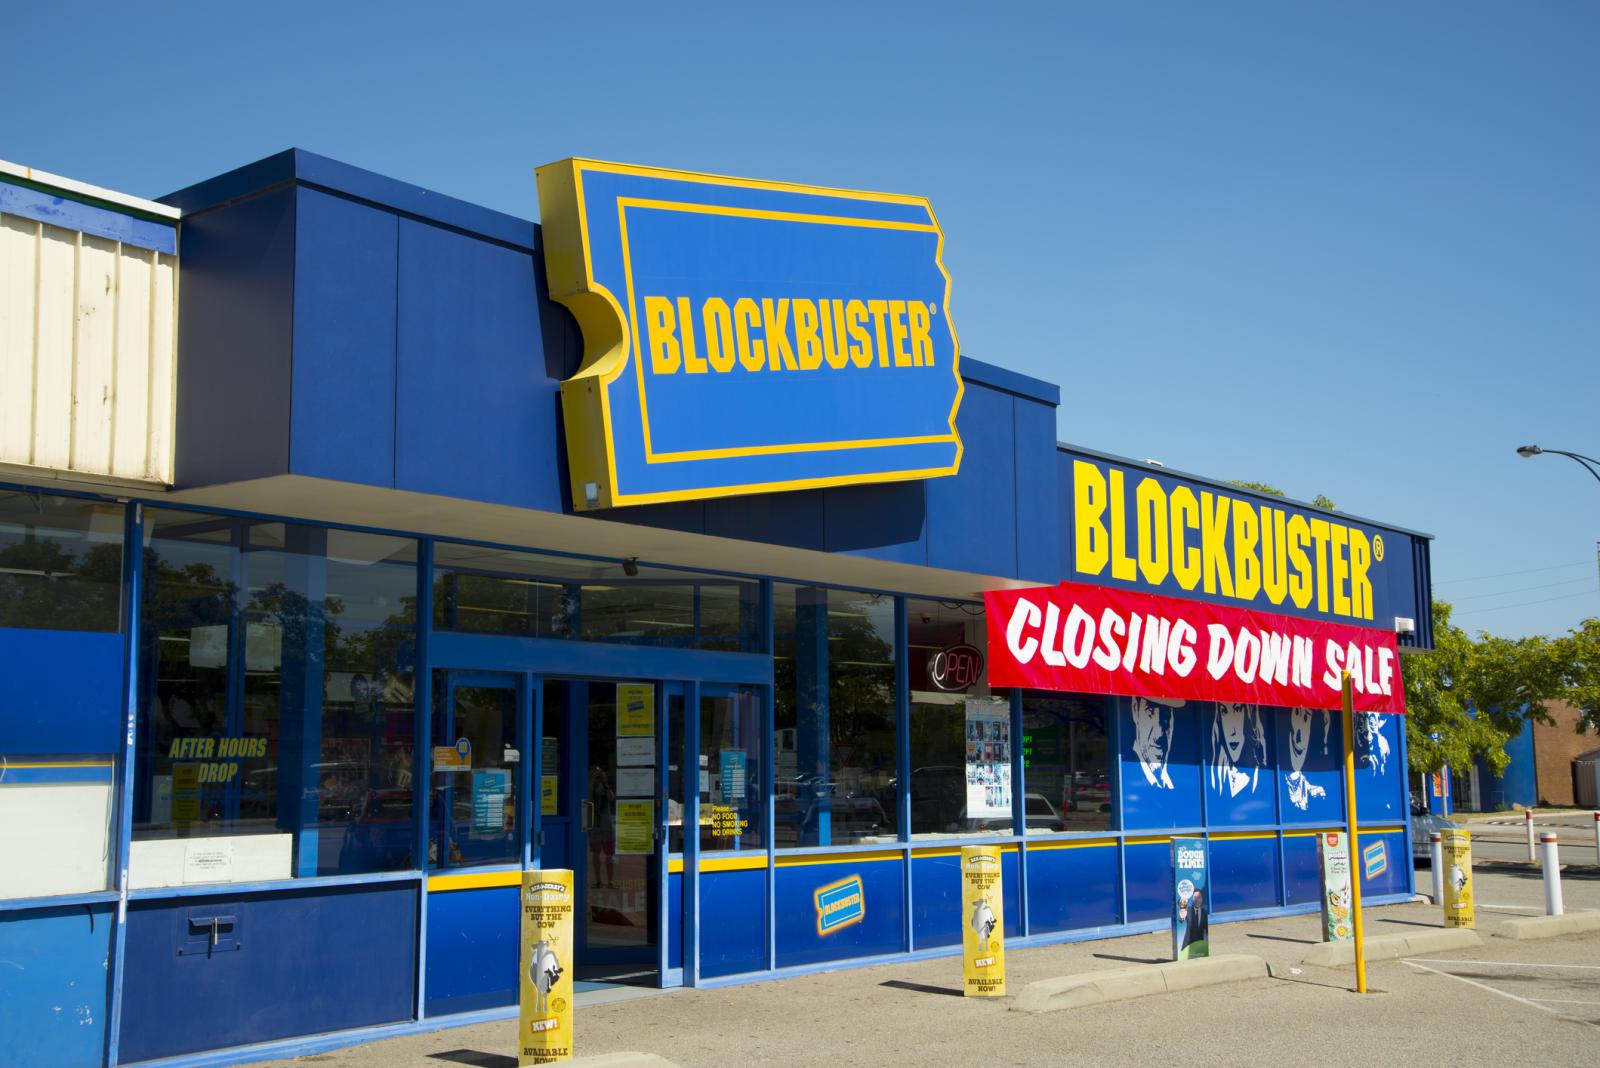 If You Get 14/17 on This Random Trivia Quiz, Then It’s Official: You Are Extremely Knowledgeable Blockbuster